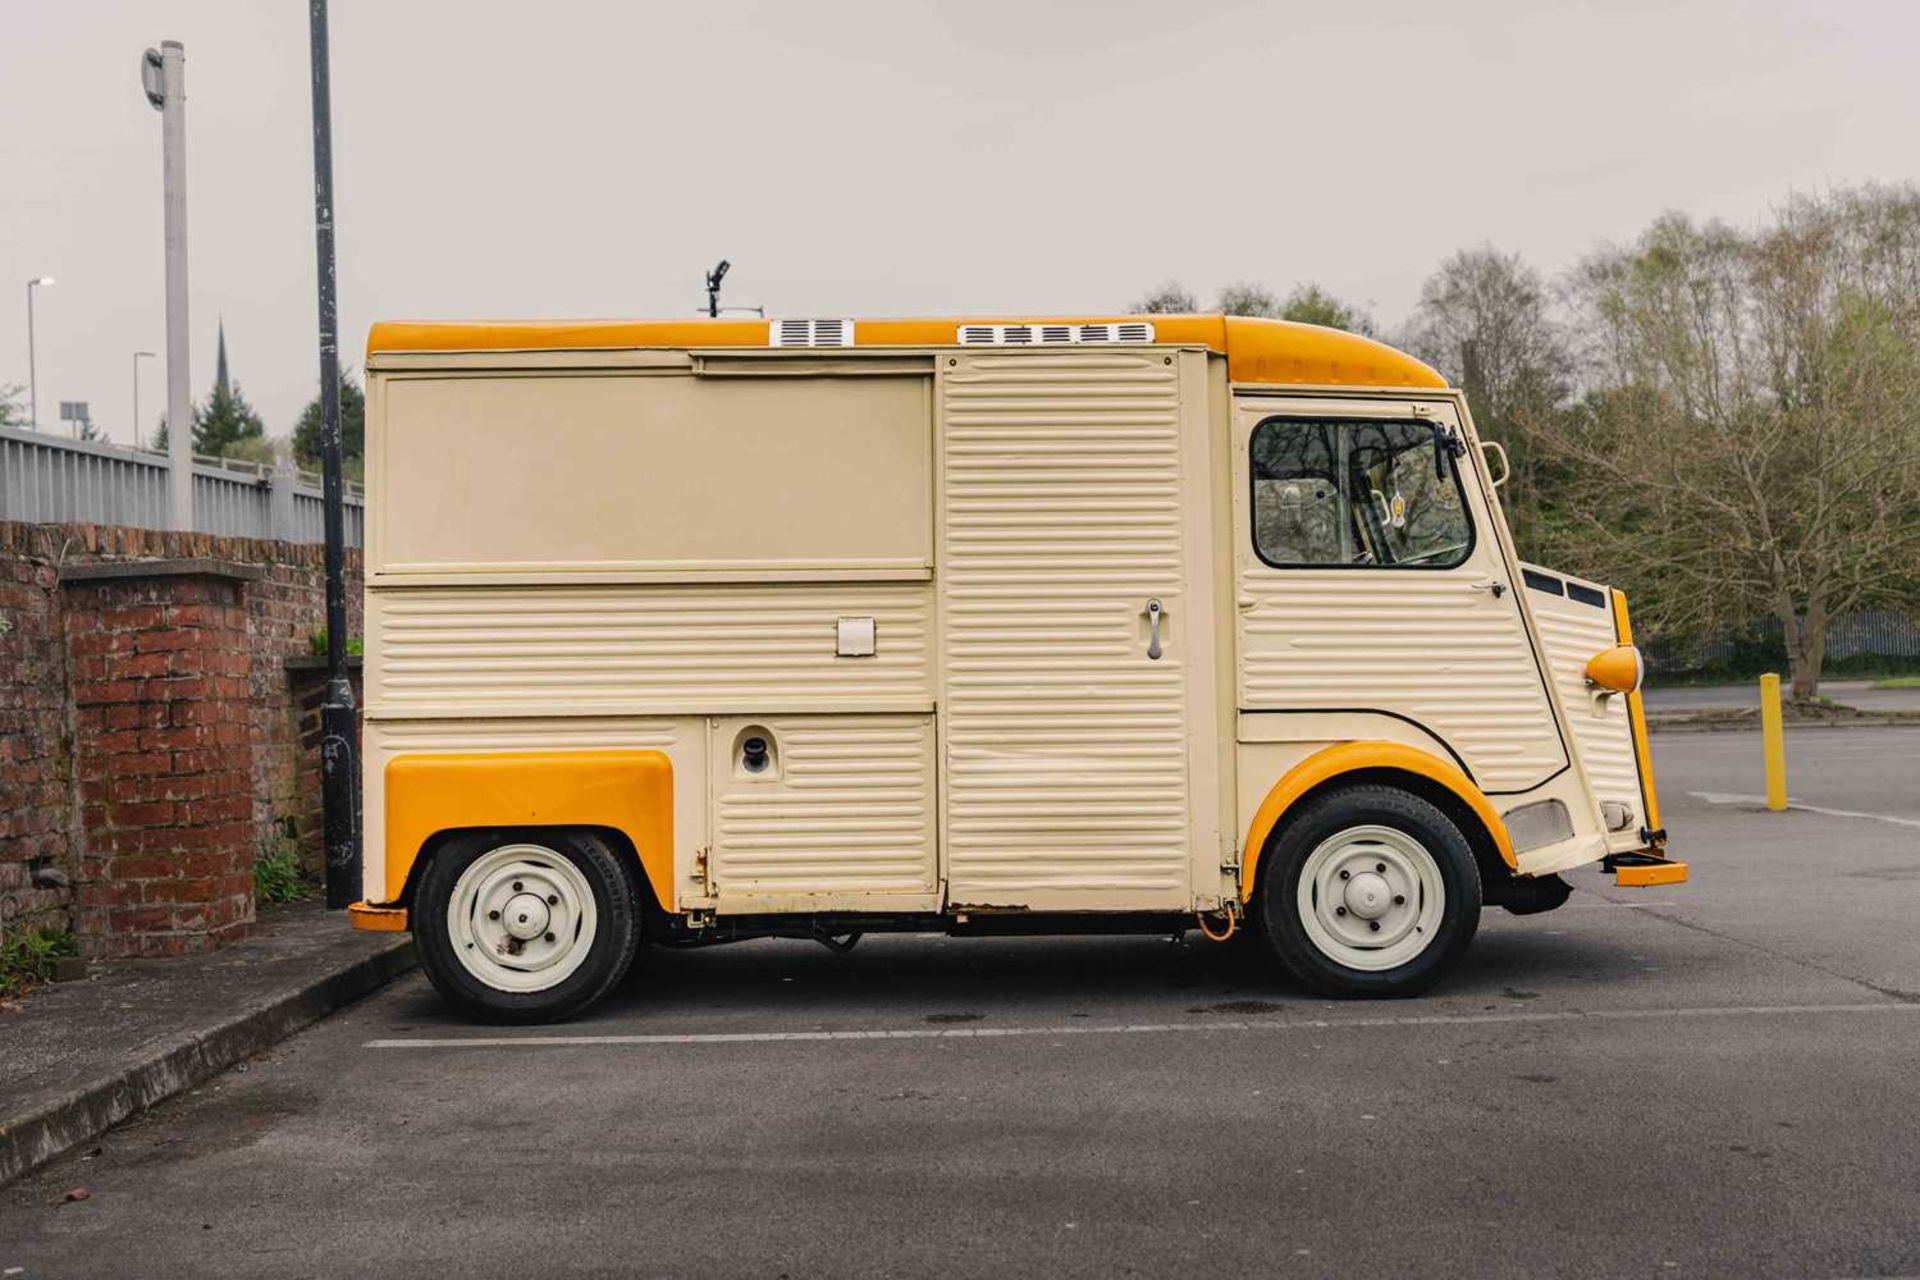 1970 Citroen HY Van Fully fitted-out boutique catering van ready to go into business - Image 12 of 59